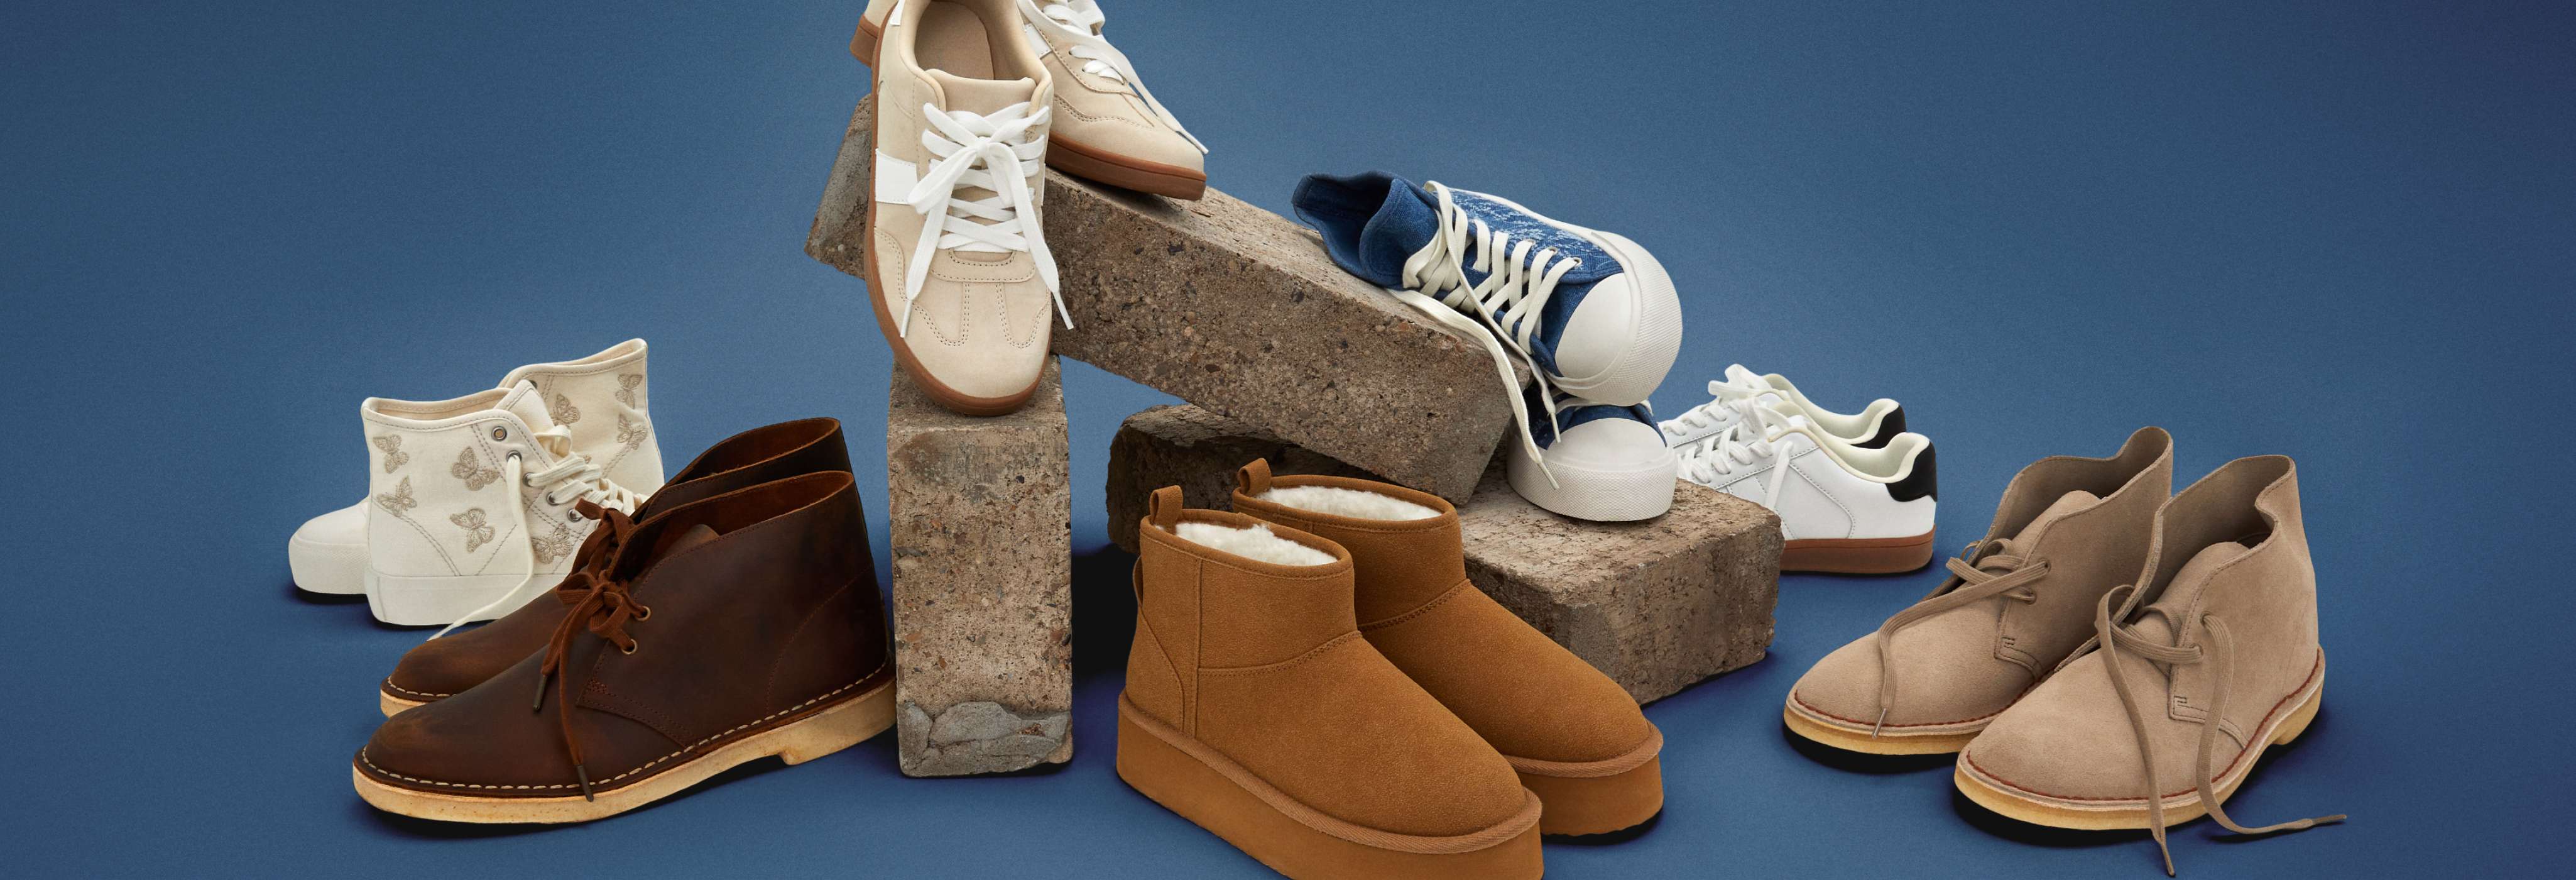 Women's Shoes, Sneakers & Sandals | American Eagle